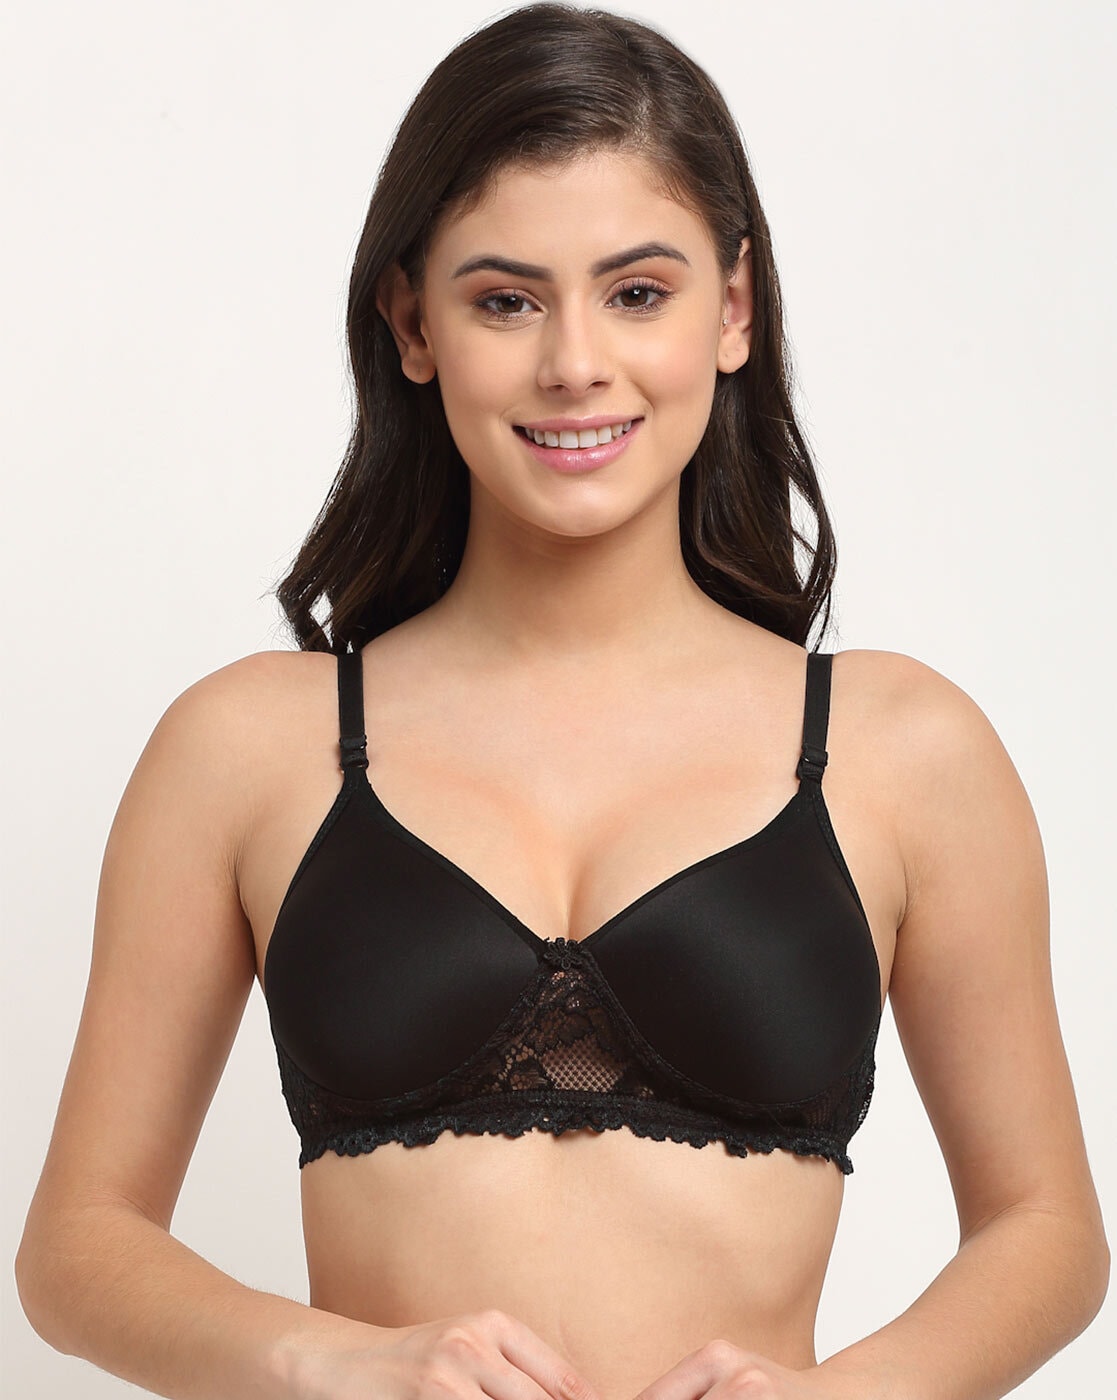 Lycra Cotton Double Padded Bra, Skin at Rs 180/piece in Amritsar